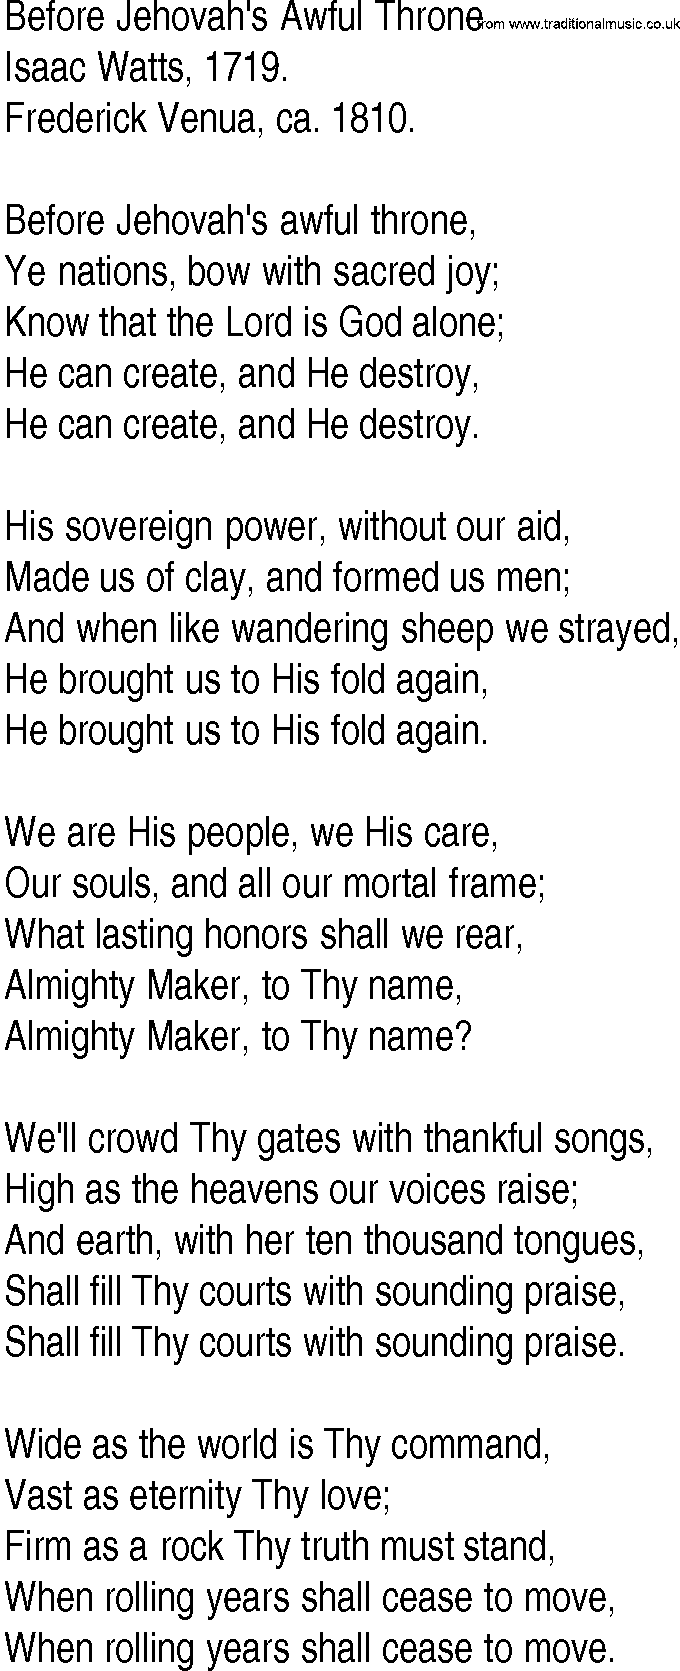 Hymn and Gospel Song: Before Jehovah's Awful Throne by Isaac Watts lyrics